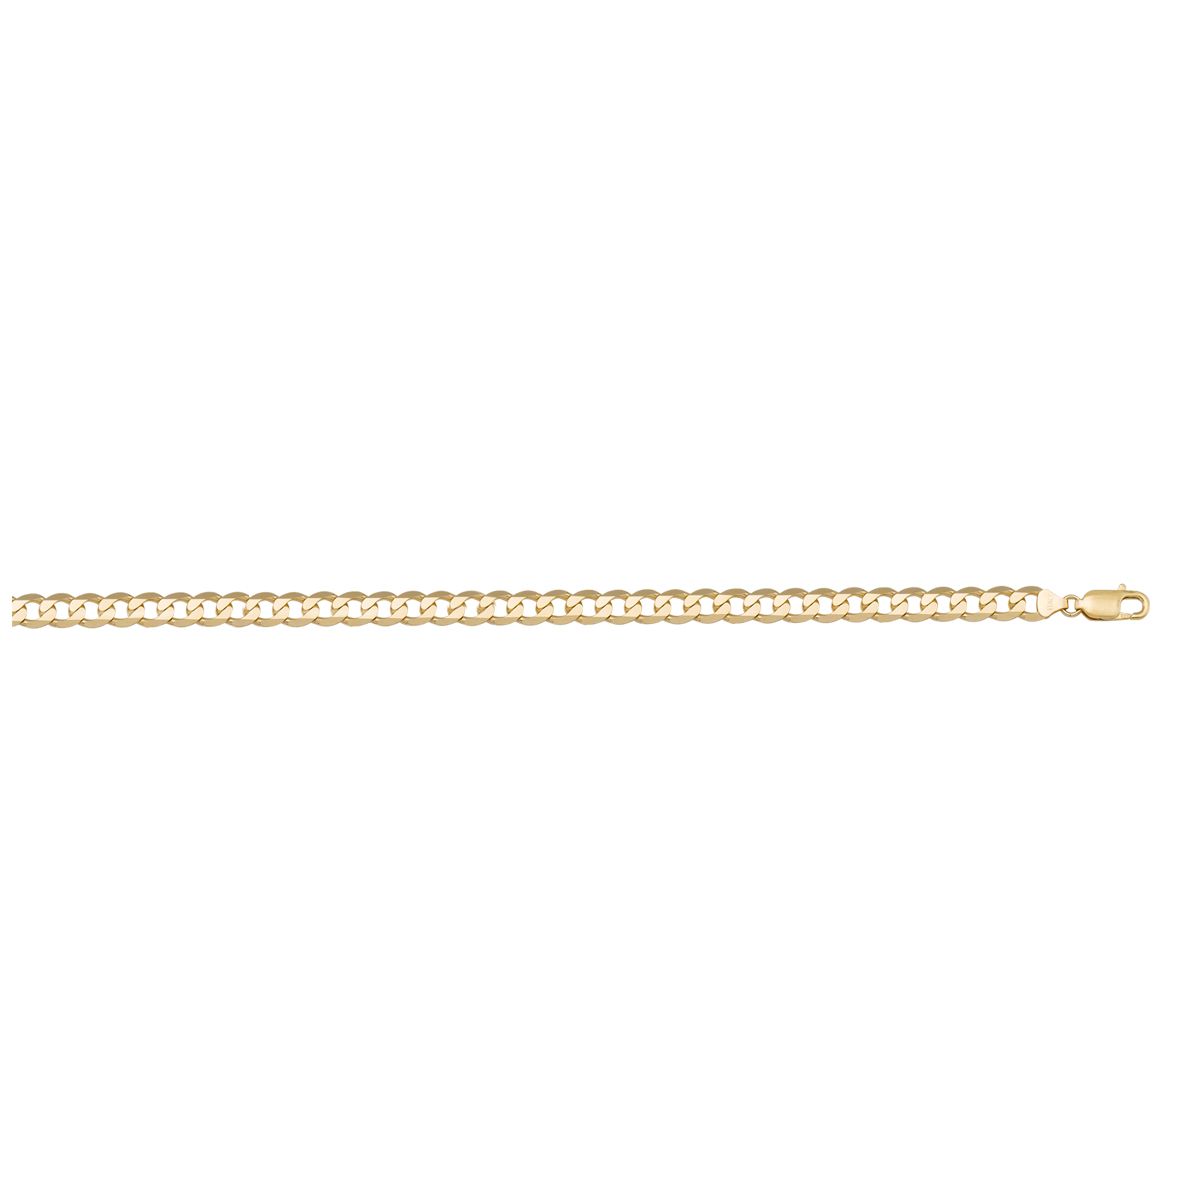 ACRB04, Gold Anklet, Open Curb, Yellow or White Gold